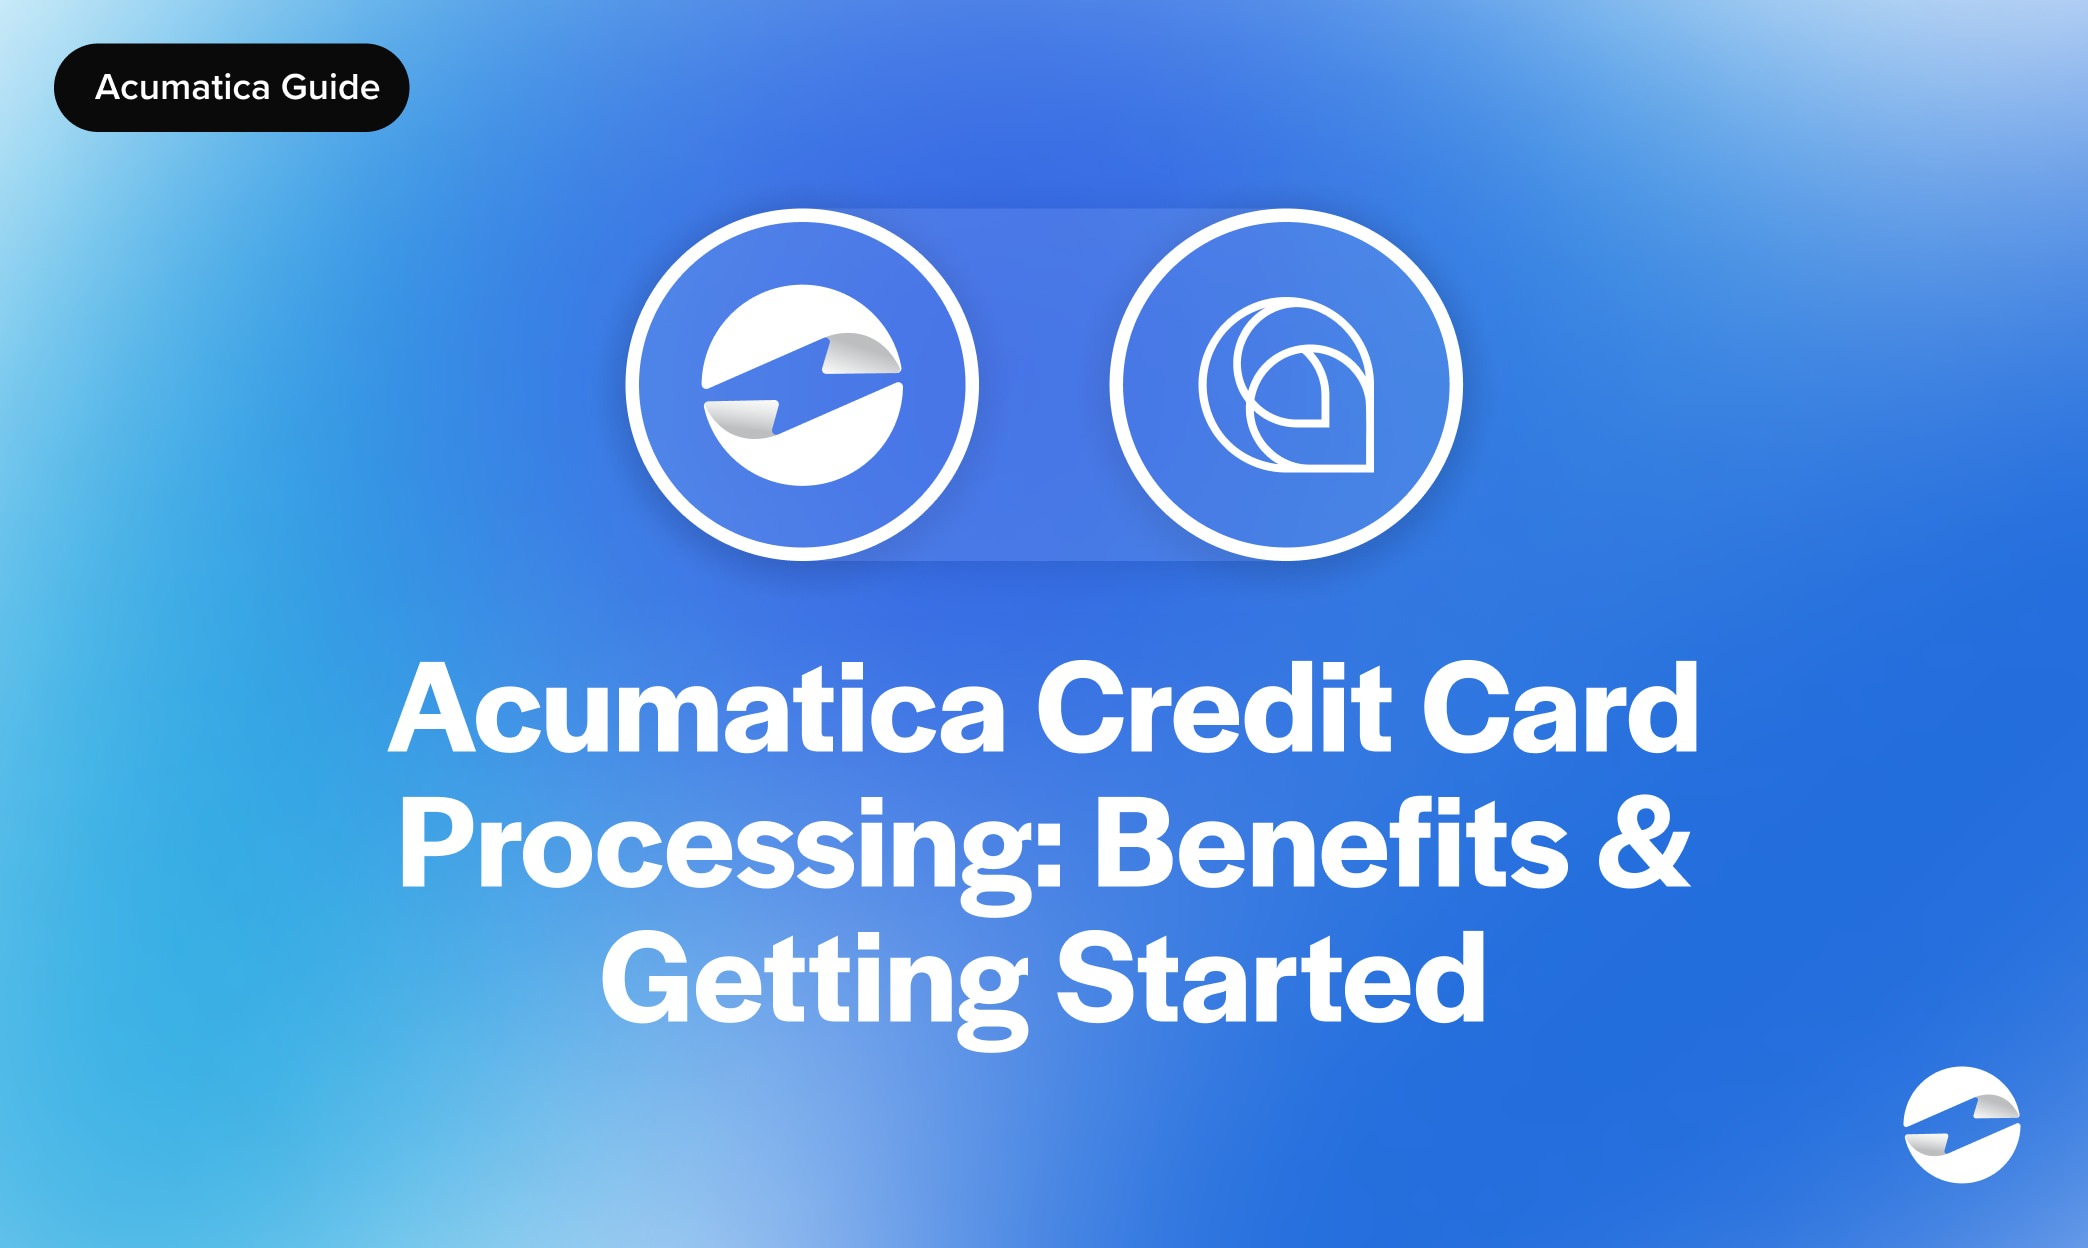 Acumatica Credit Card Processing: Benefits and Getting Started